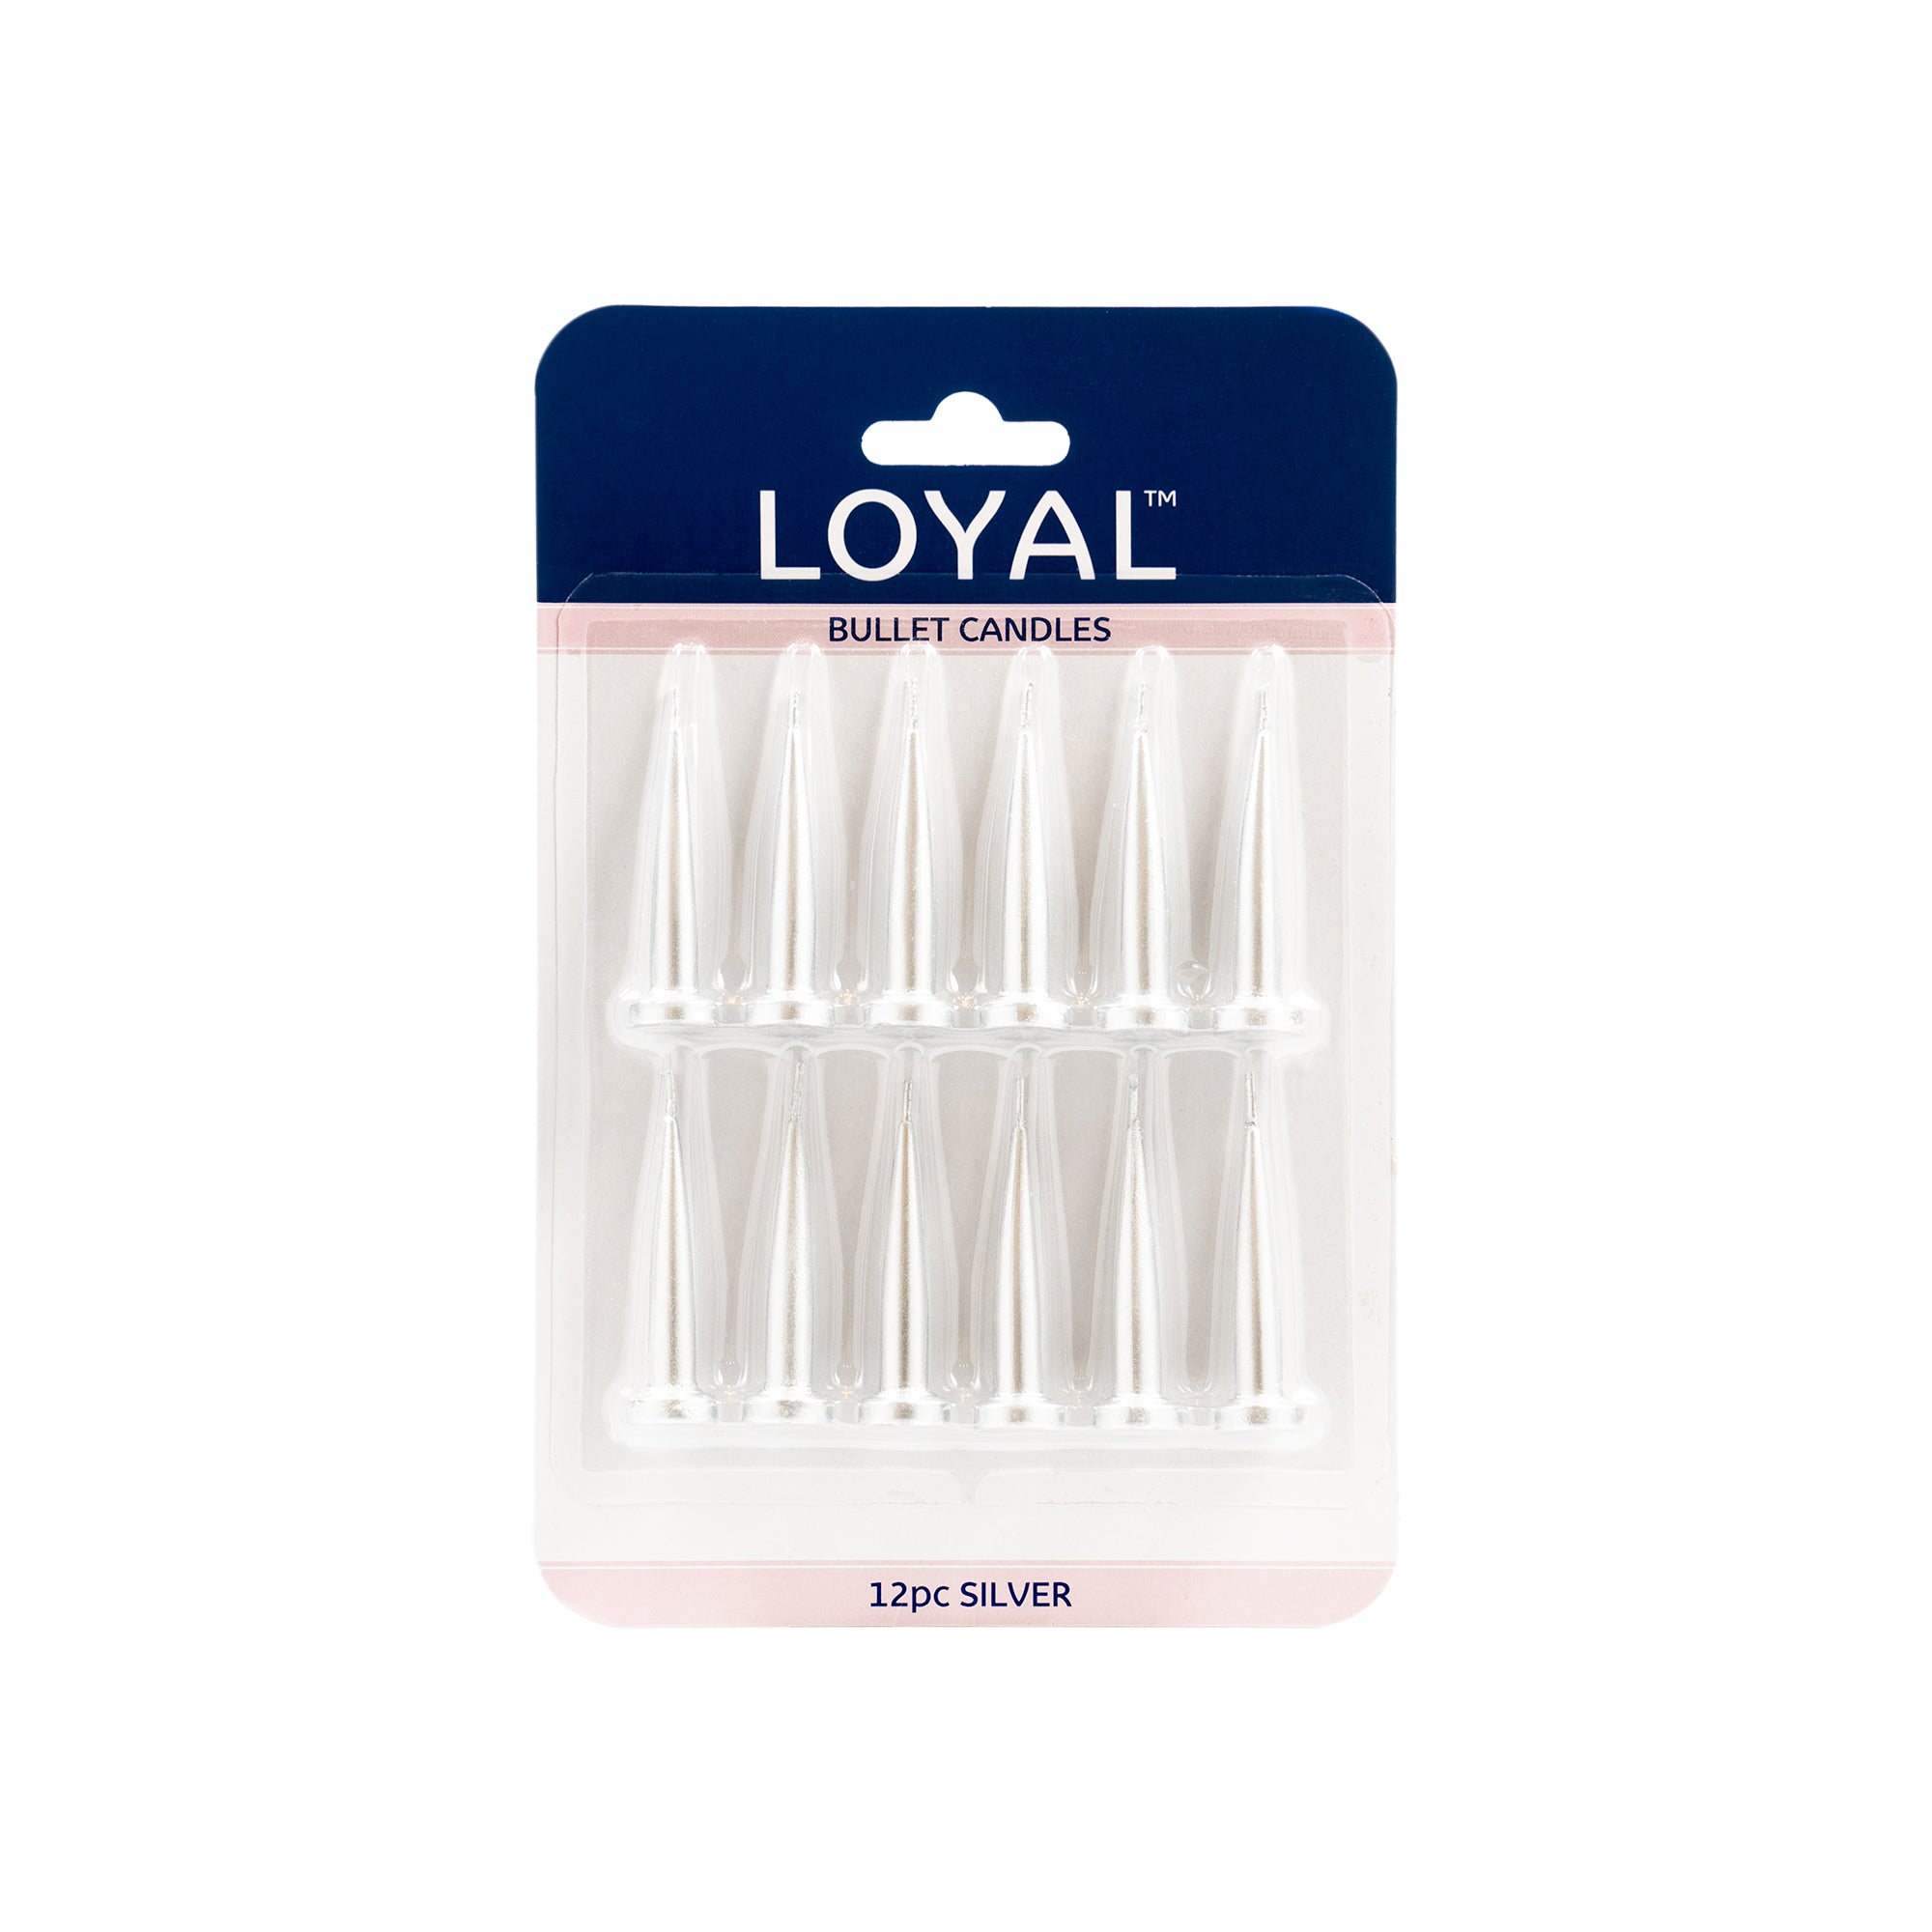 Bullet Candle Metallic Silver (12pc)